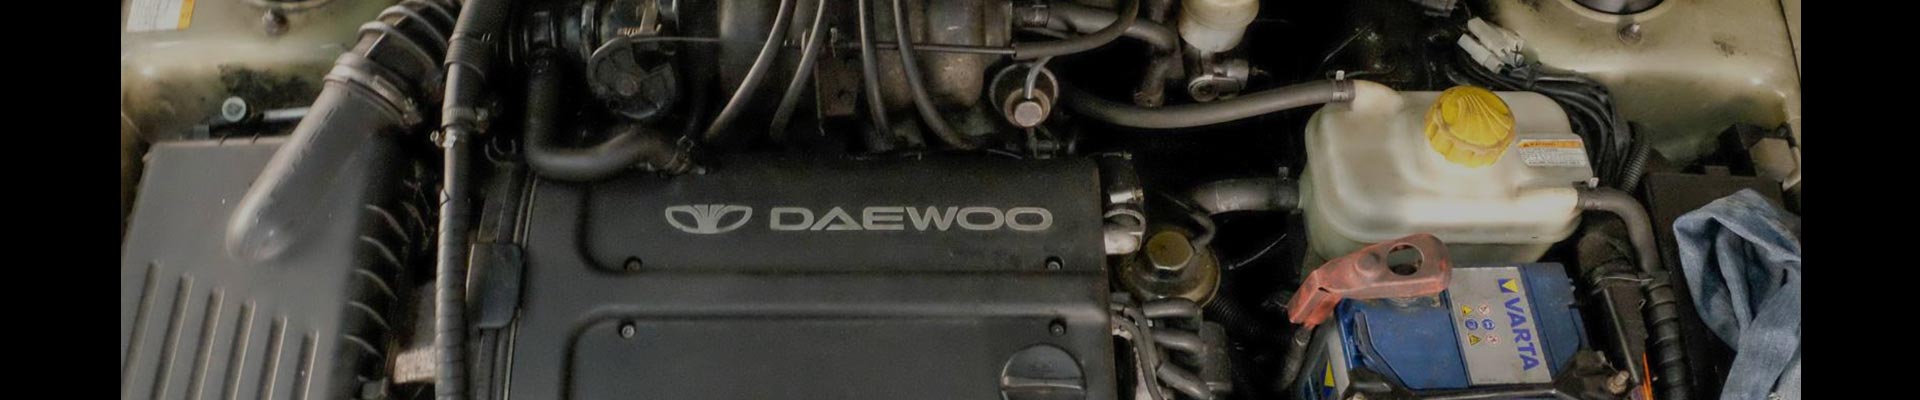 Shop Replacement 2001 Daewoo Leganza Parts with Discounted Price on the Net